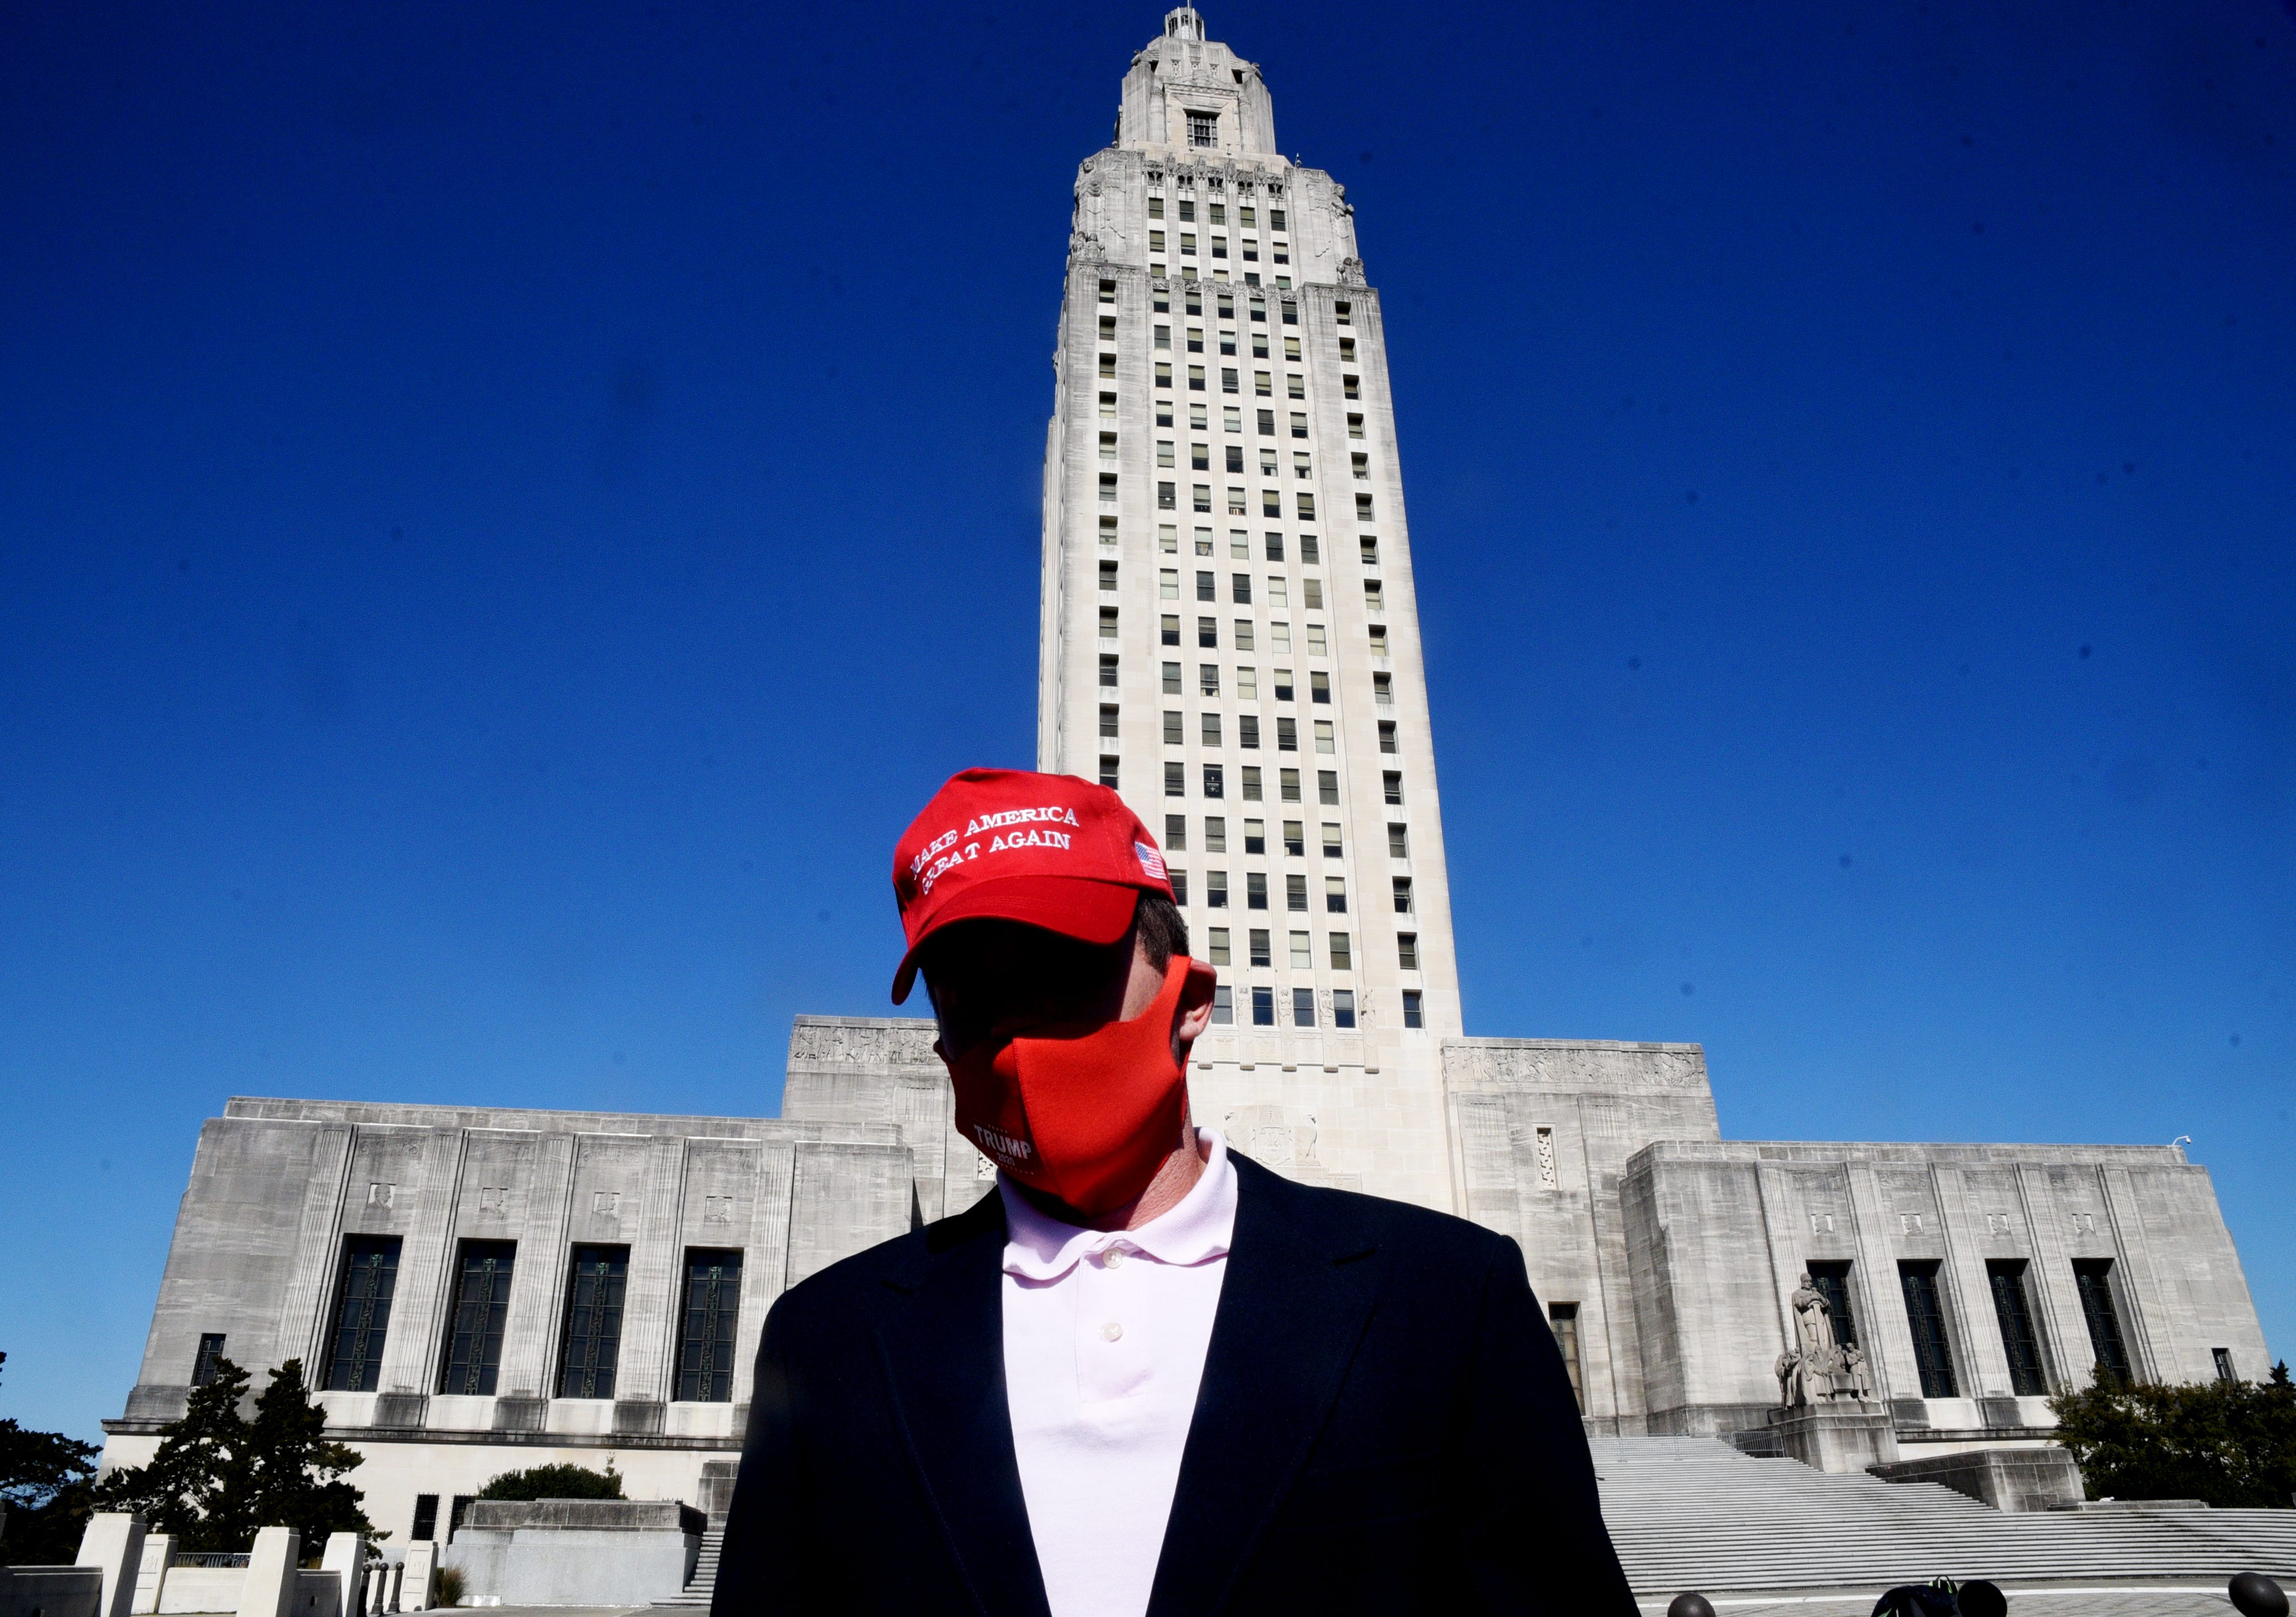 A lone protester showed up at the Louisiana State Capital on Sunday, Jan. 17, 2021.